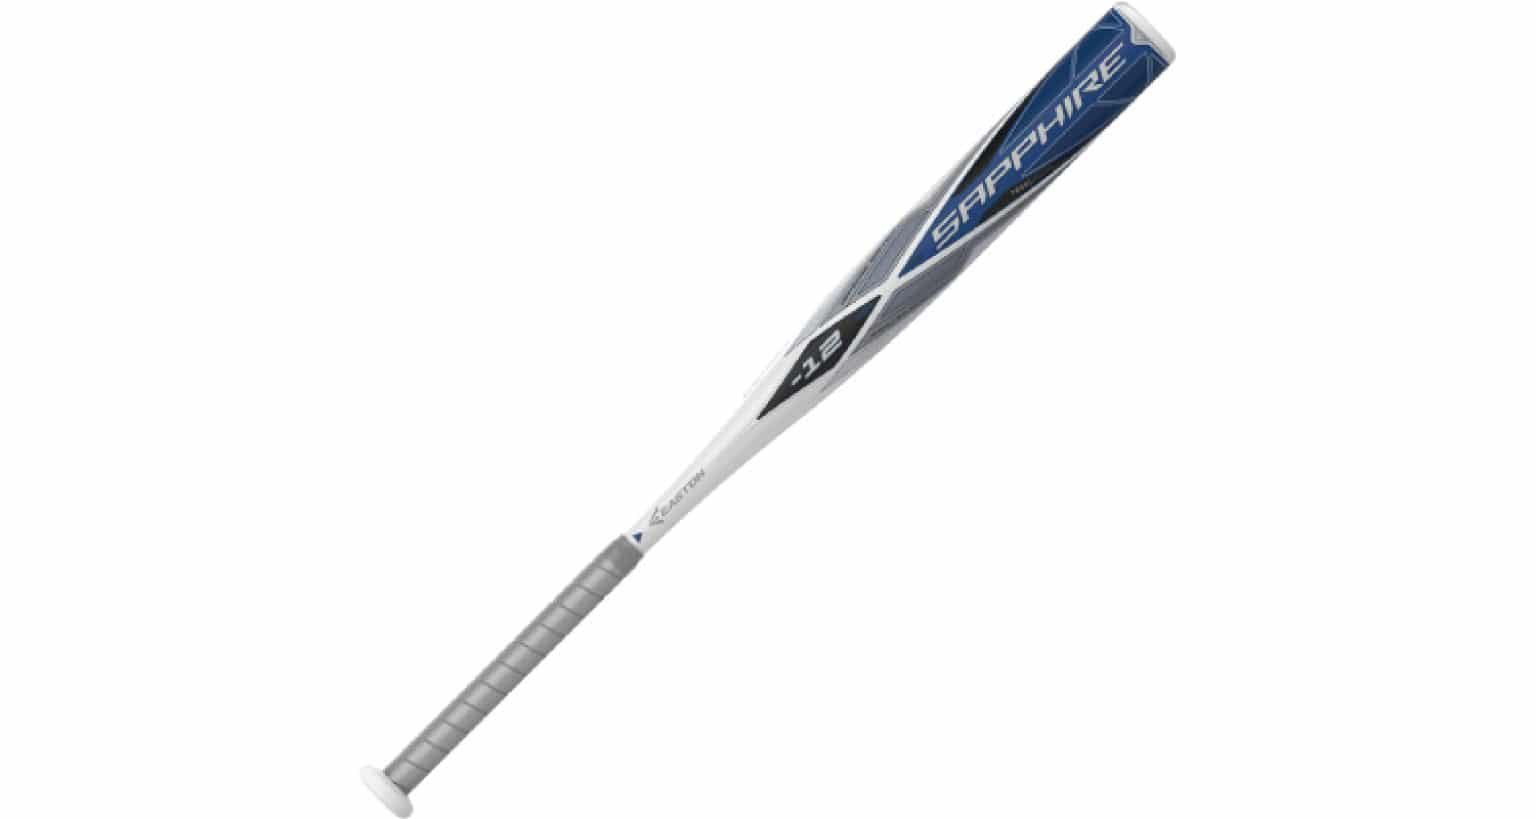 Easton Softball Bats Reviewed Tried and Tested Aluminum Innovation